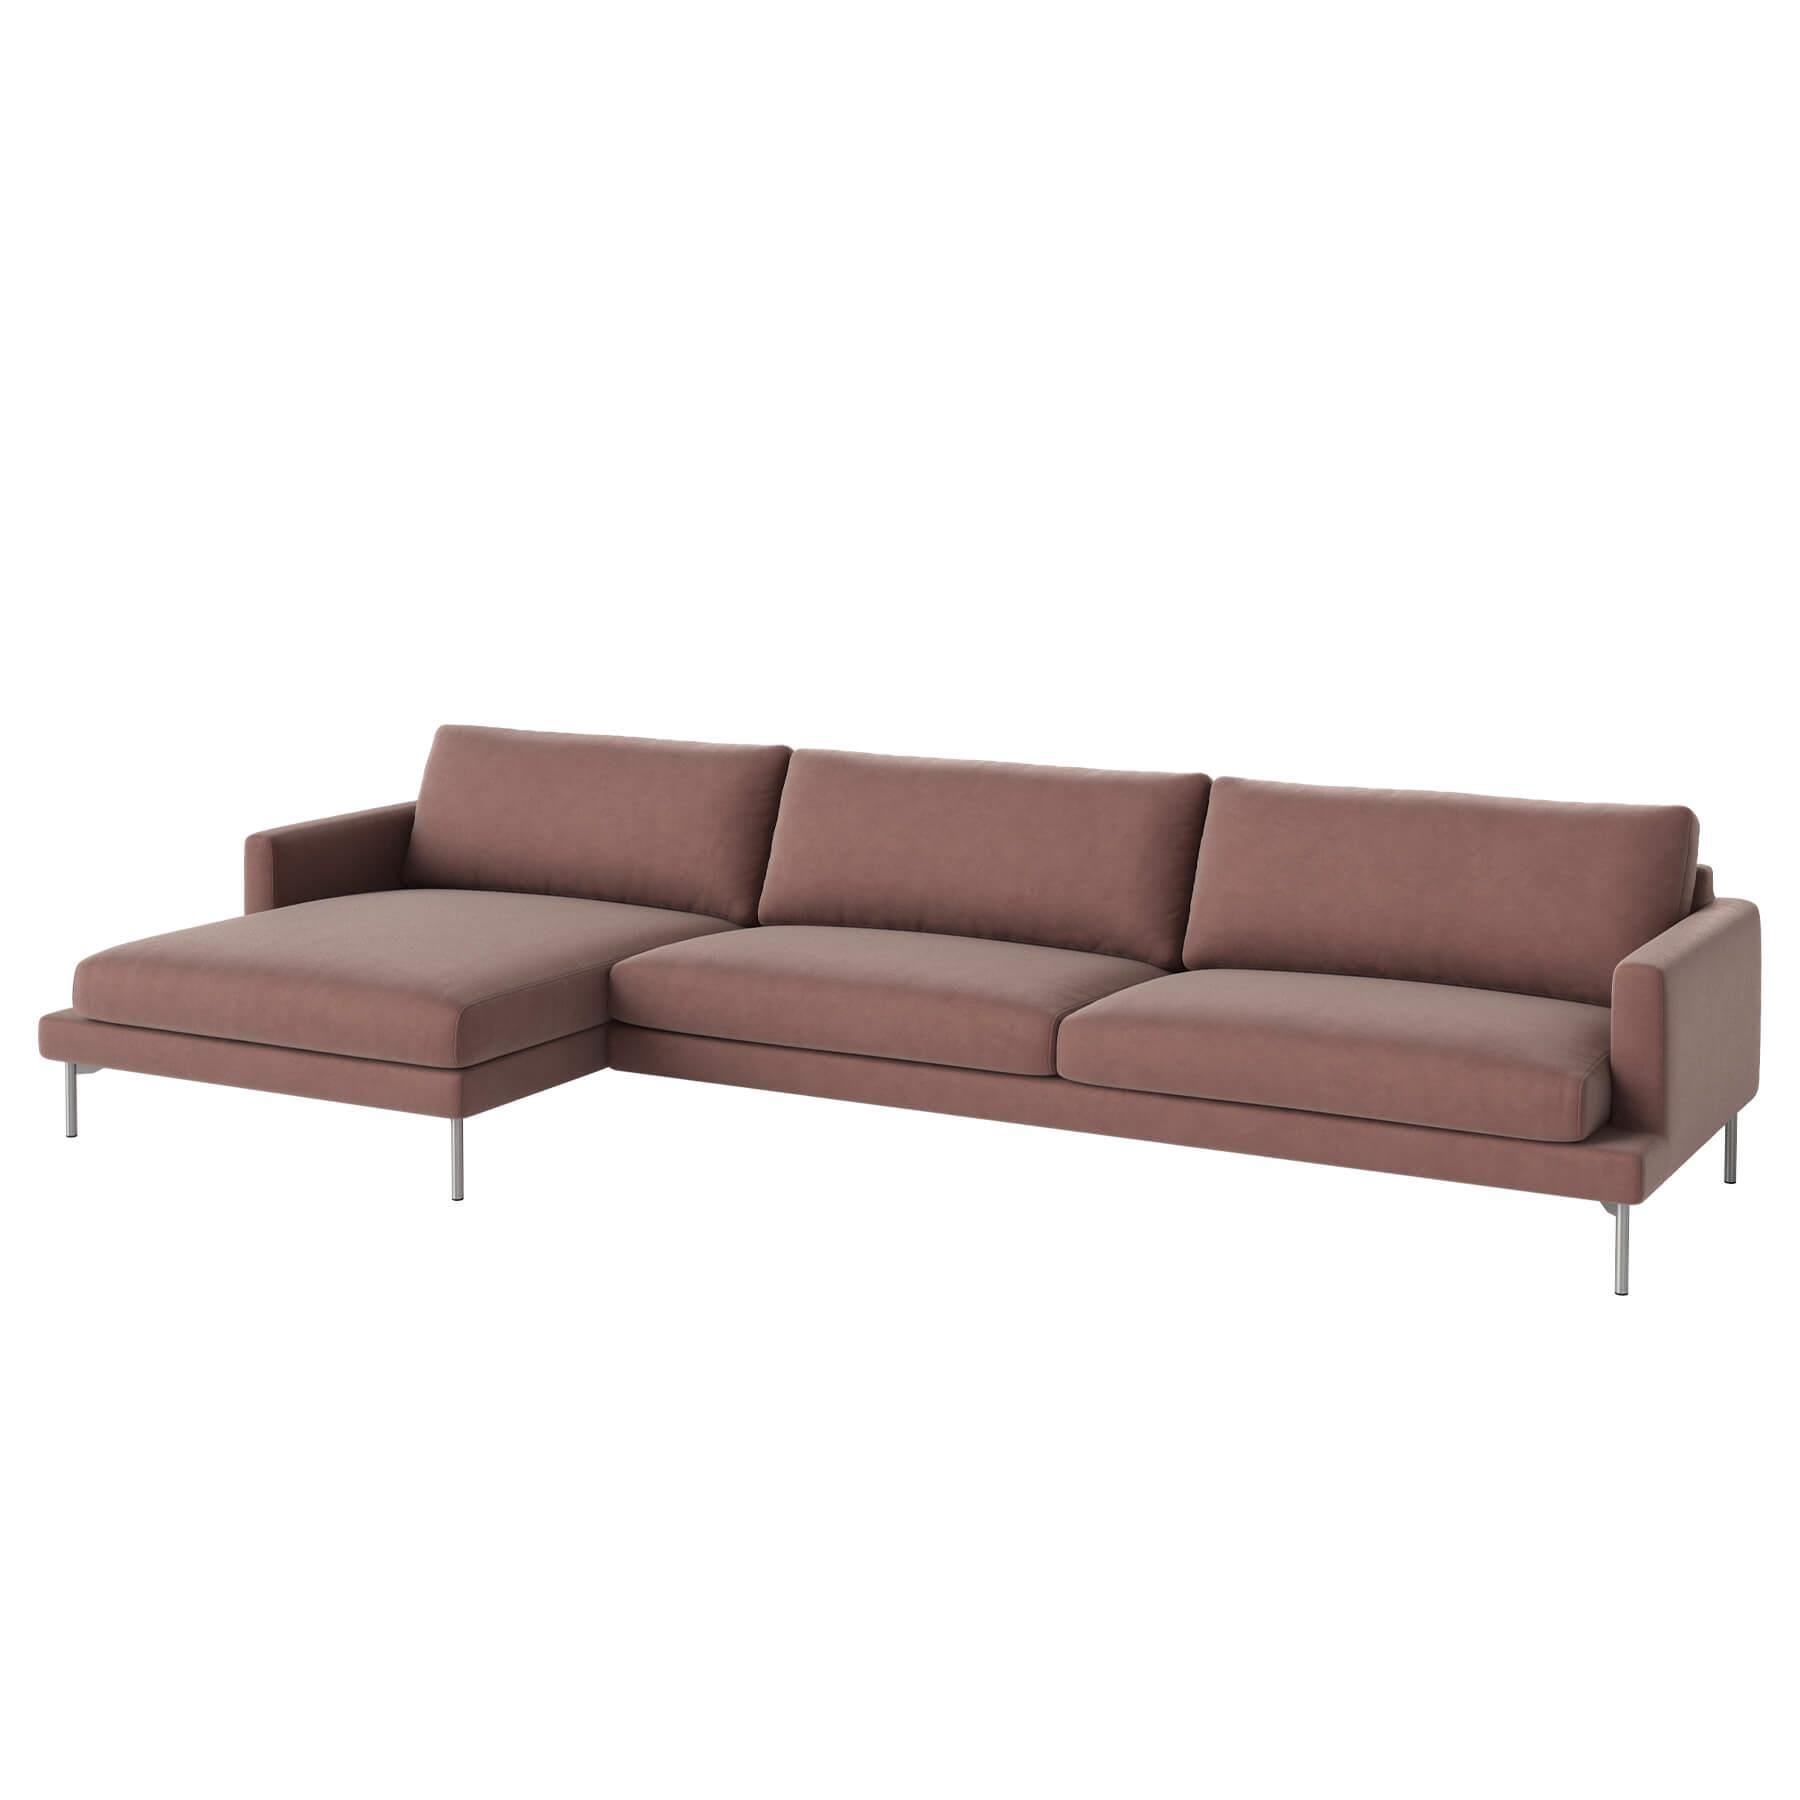 Bolia Veneda Sofa 45 Seater Sofa With Chaise Longue Brushed Steel Ritz Light Rosa Left Pink Designer Furniture From Holloways Of Ludlow